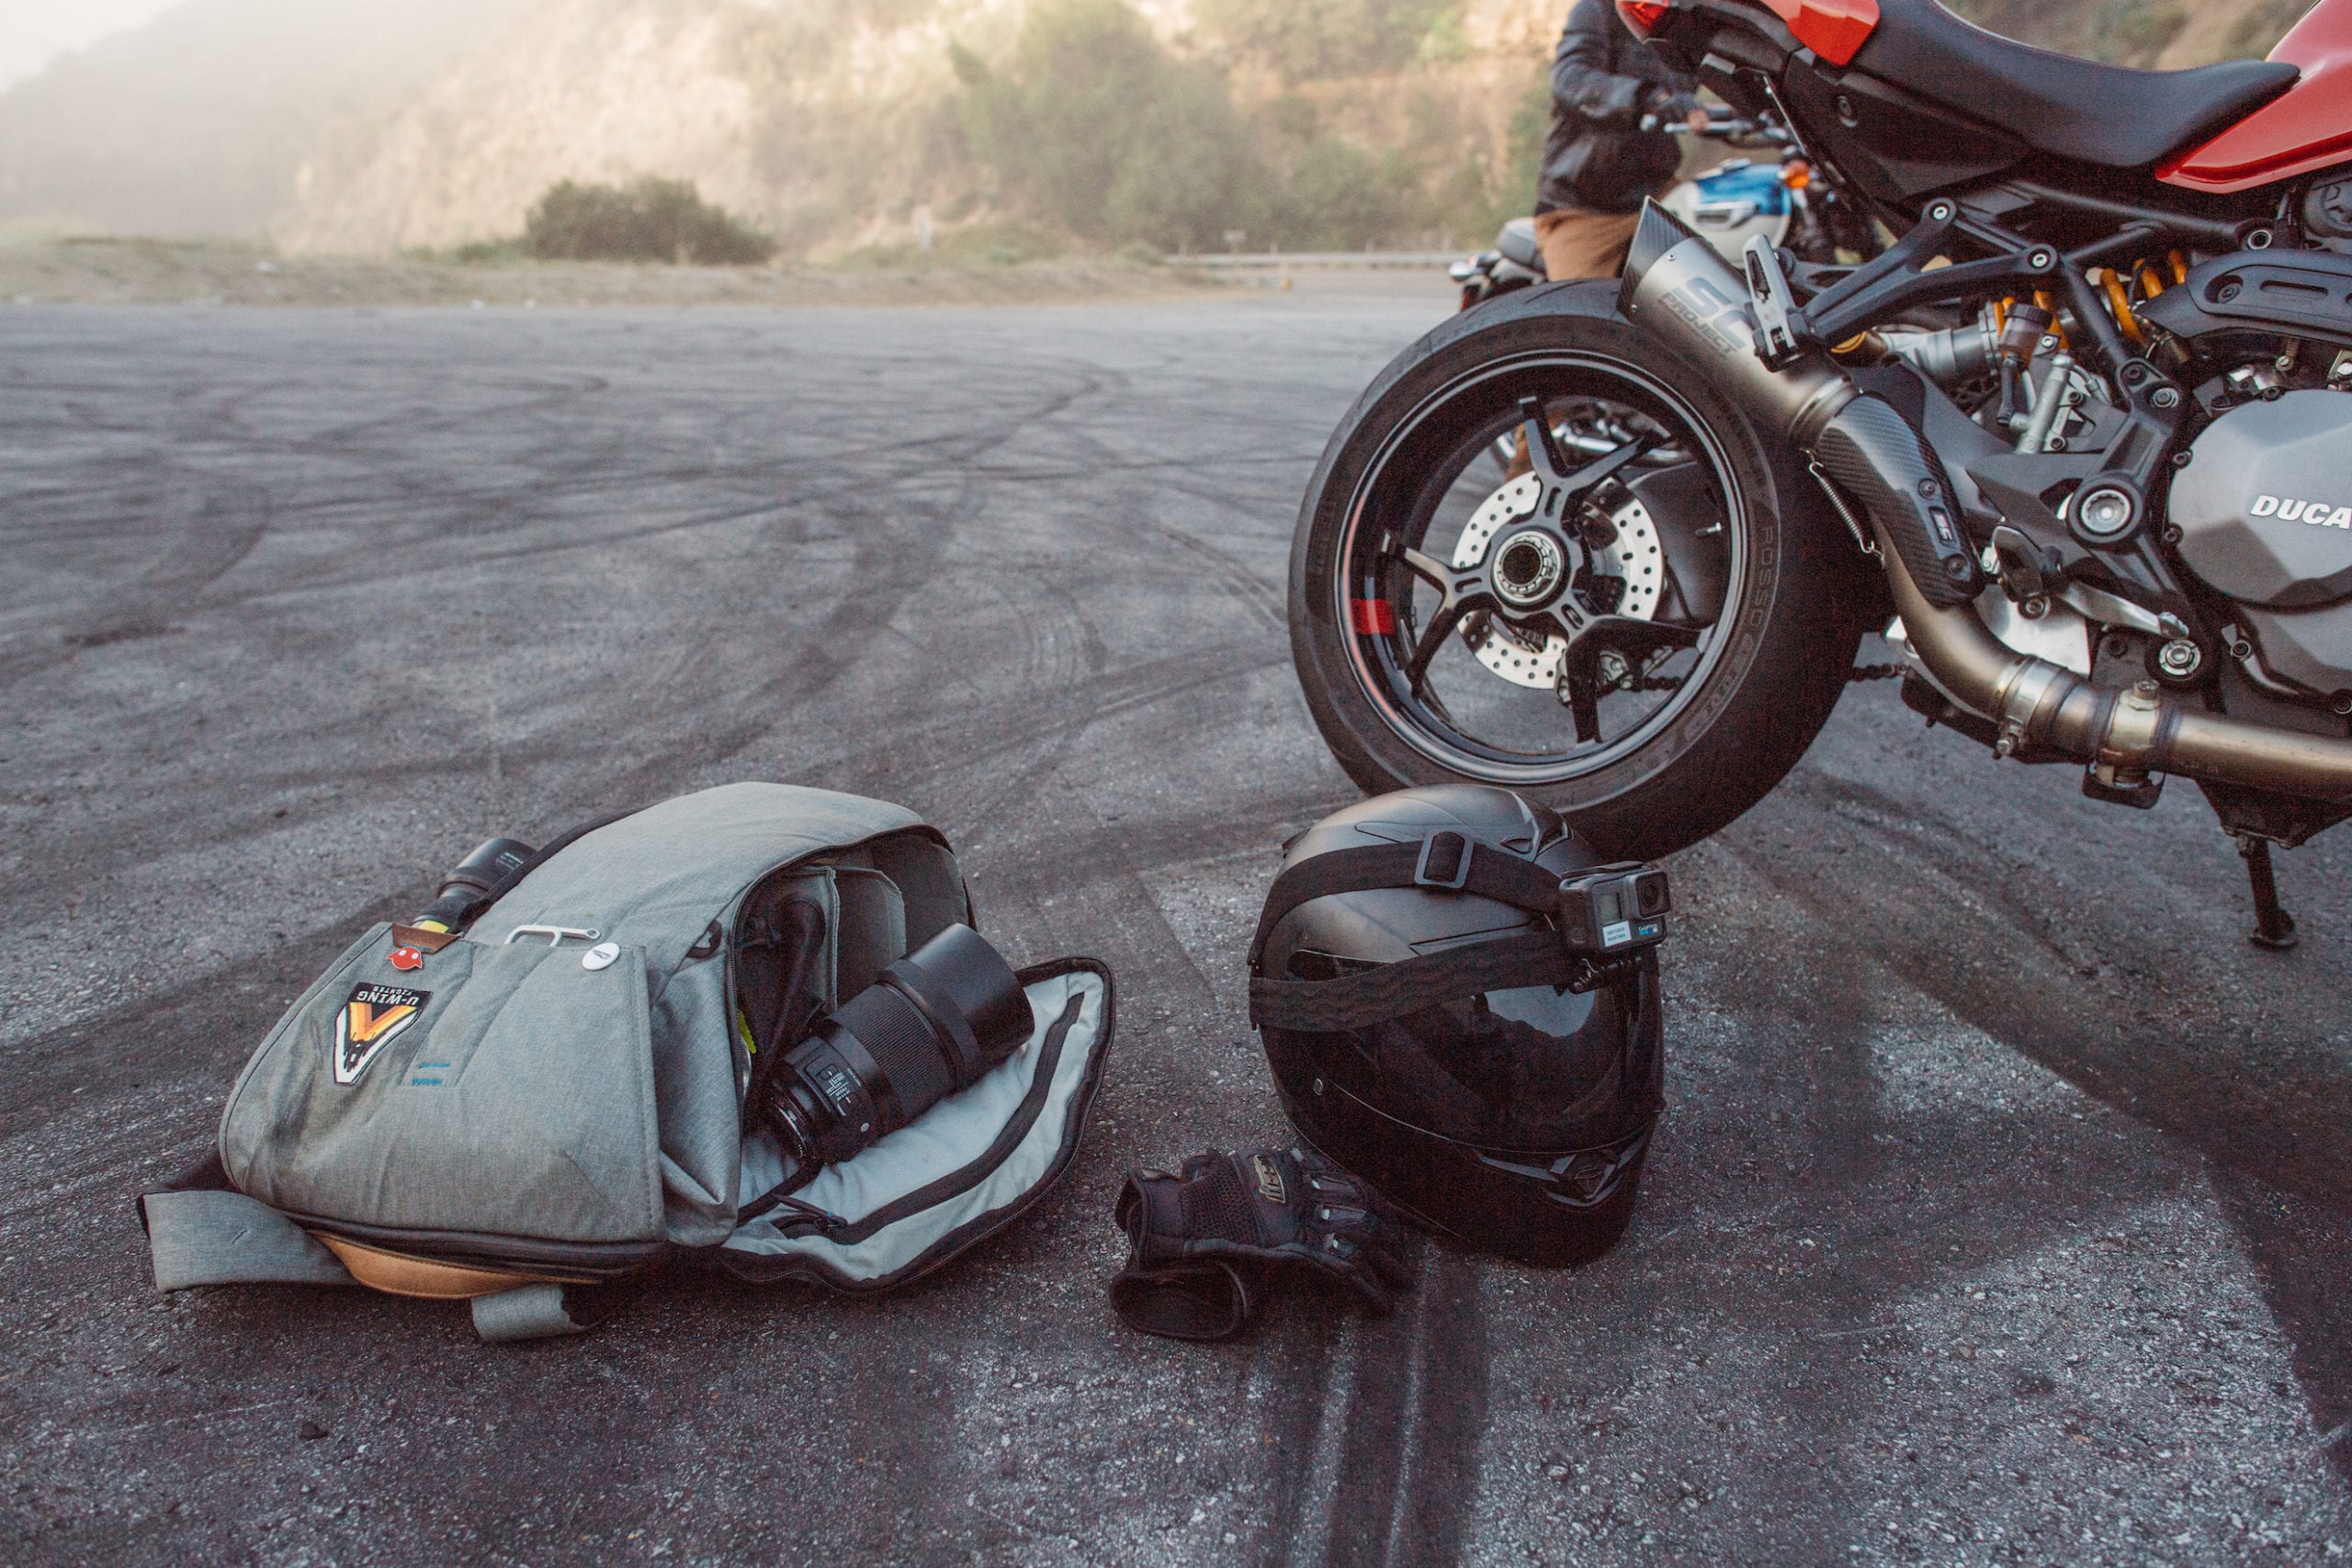 Behind the scenes on the set of the Triumph Motorcycles Euro Bike Shoot with view of the back side of the bike along with helmet with camera, backpack and leather gloves on the ground